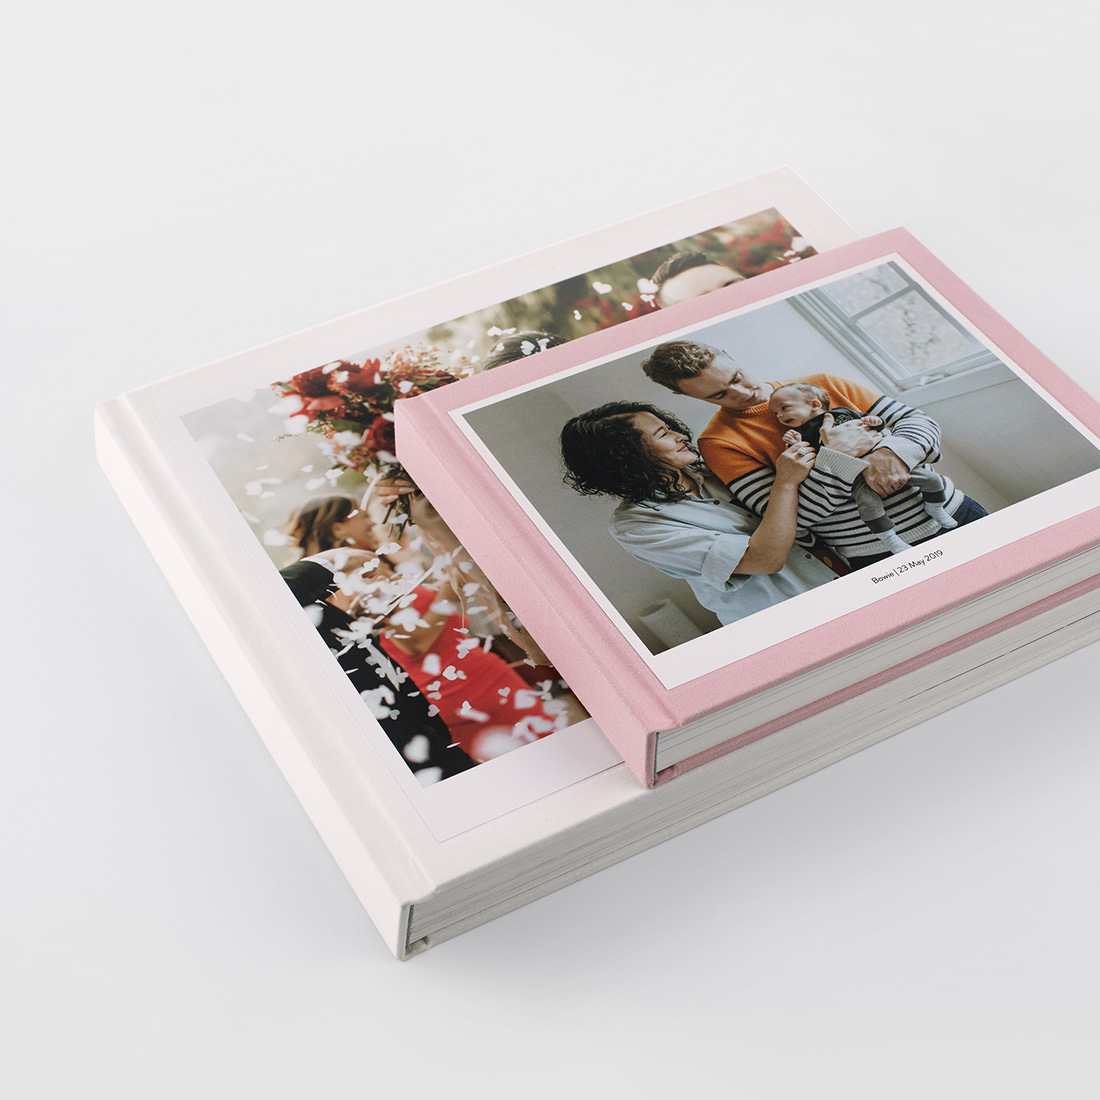 Photo Albums for Couples - Your Love Story - MILK Books